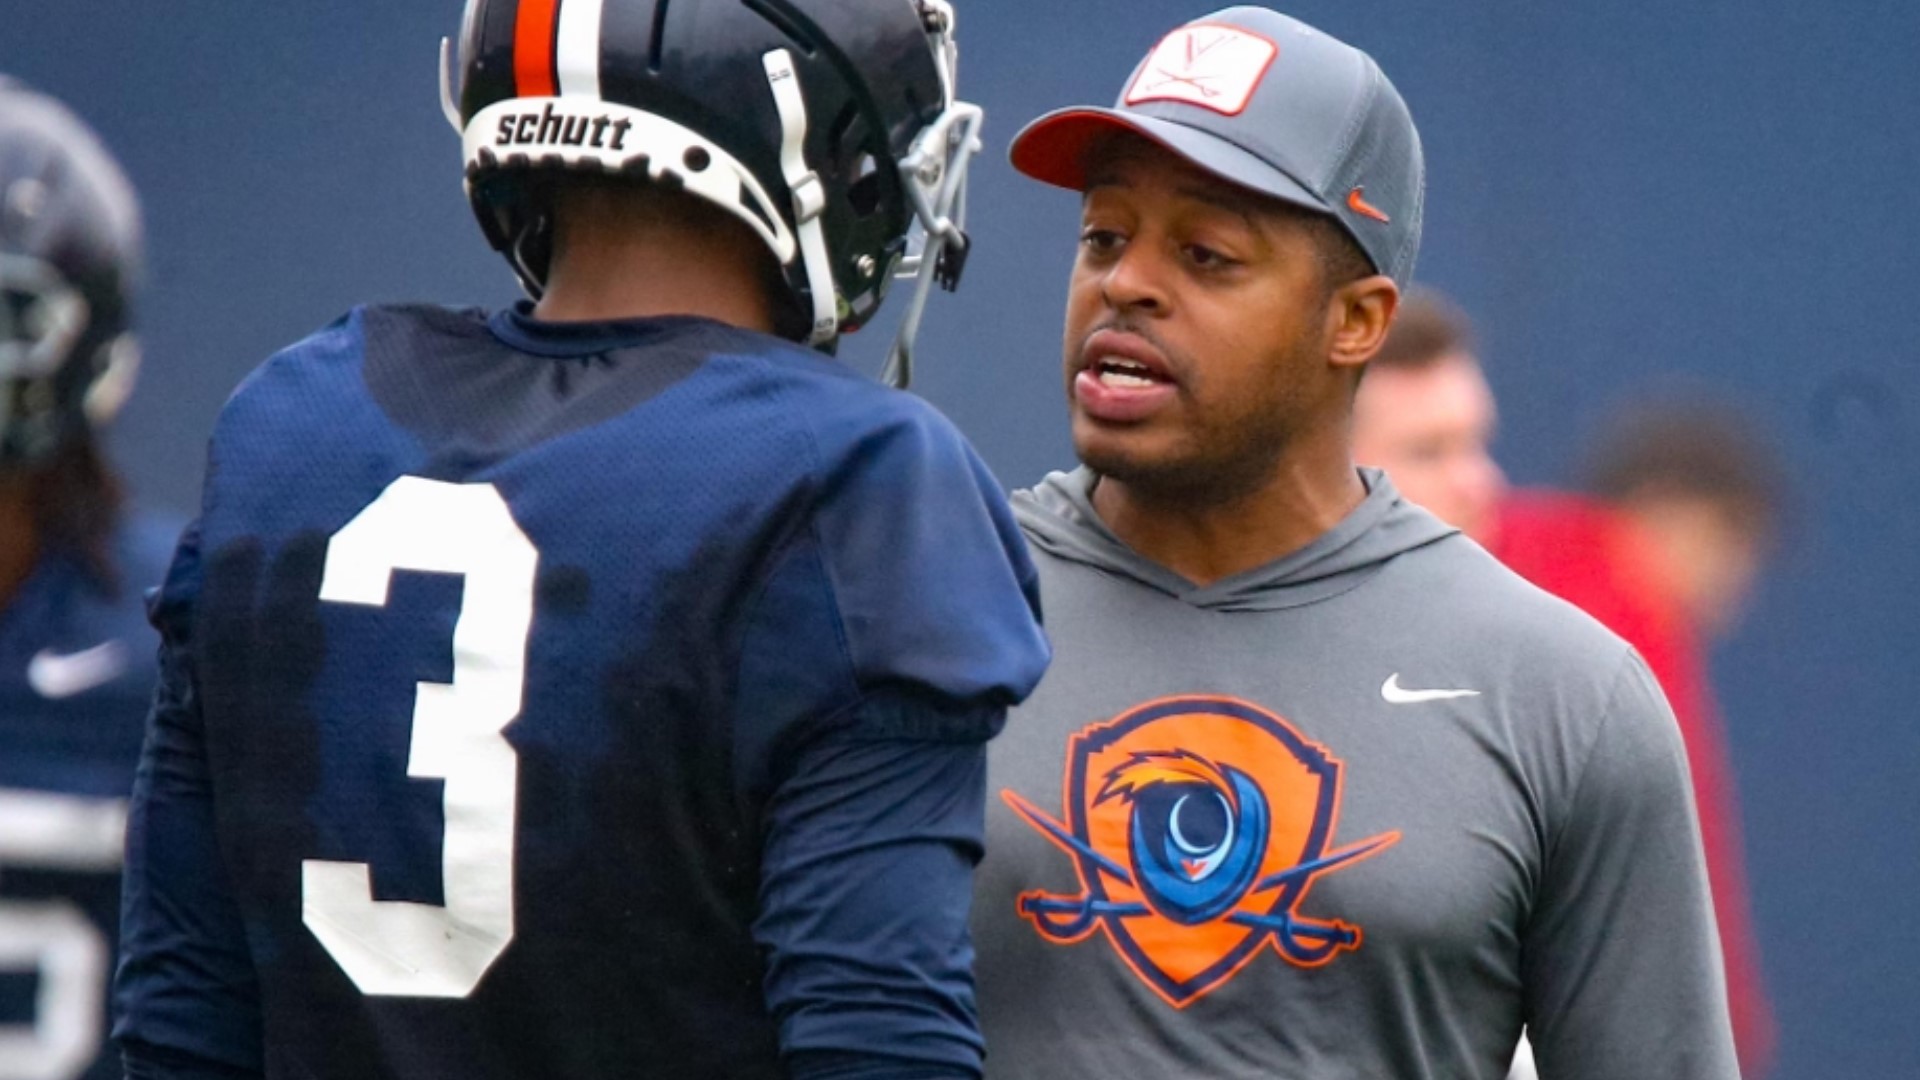 Hampton High School product Marques Hagans has coached at UVA, his alma mater, for the last 11 seasons. He will now take his talents to Happy Valley.